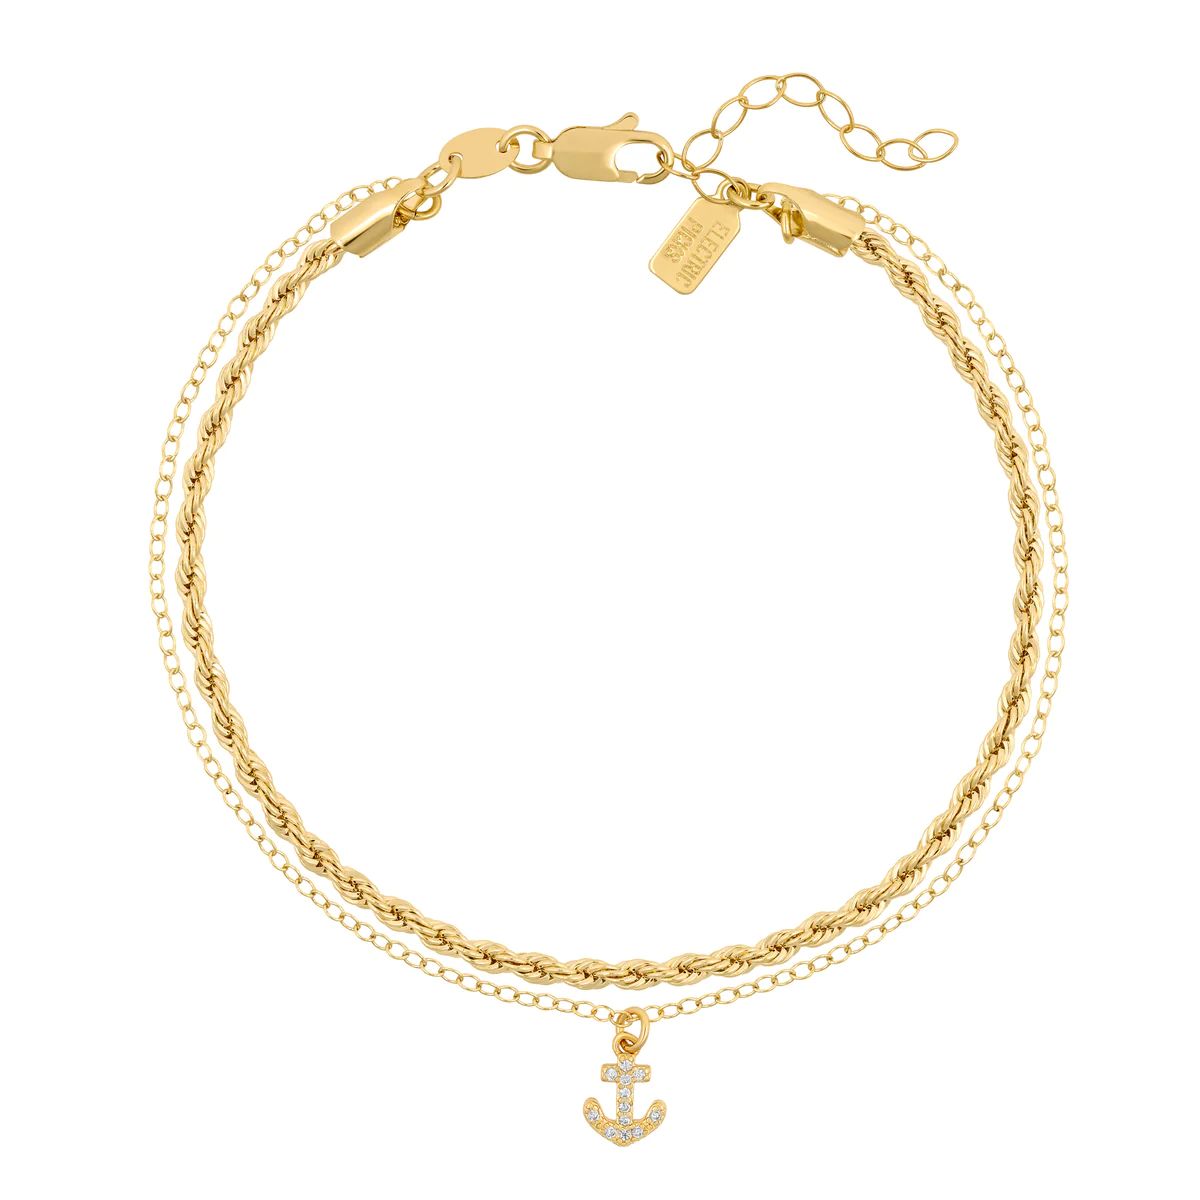 Sailor Anklet | Electric Picks Jewelry